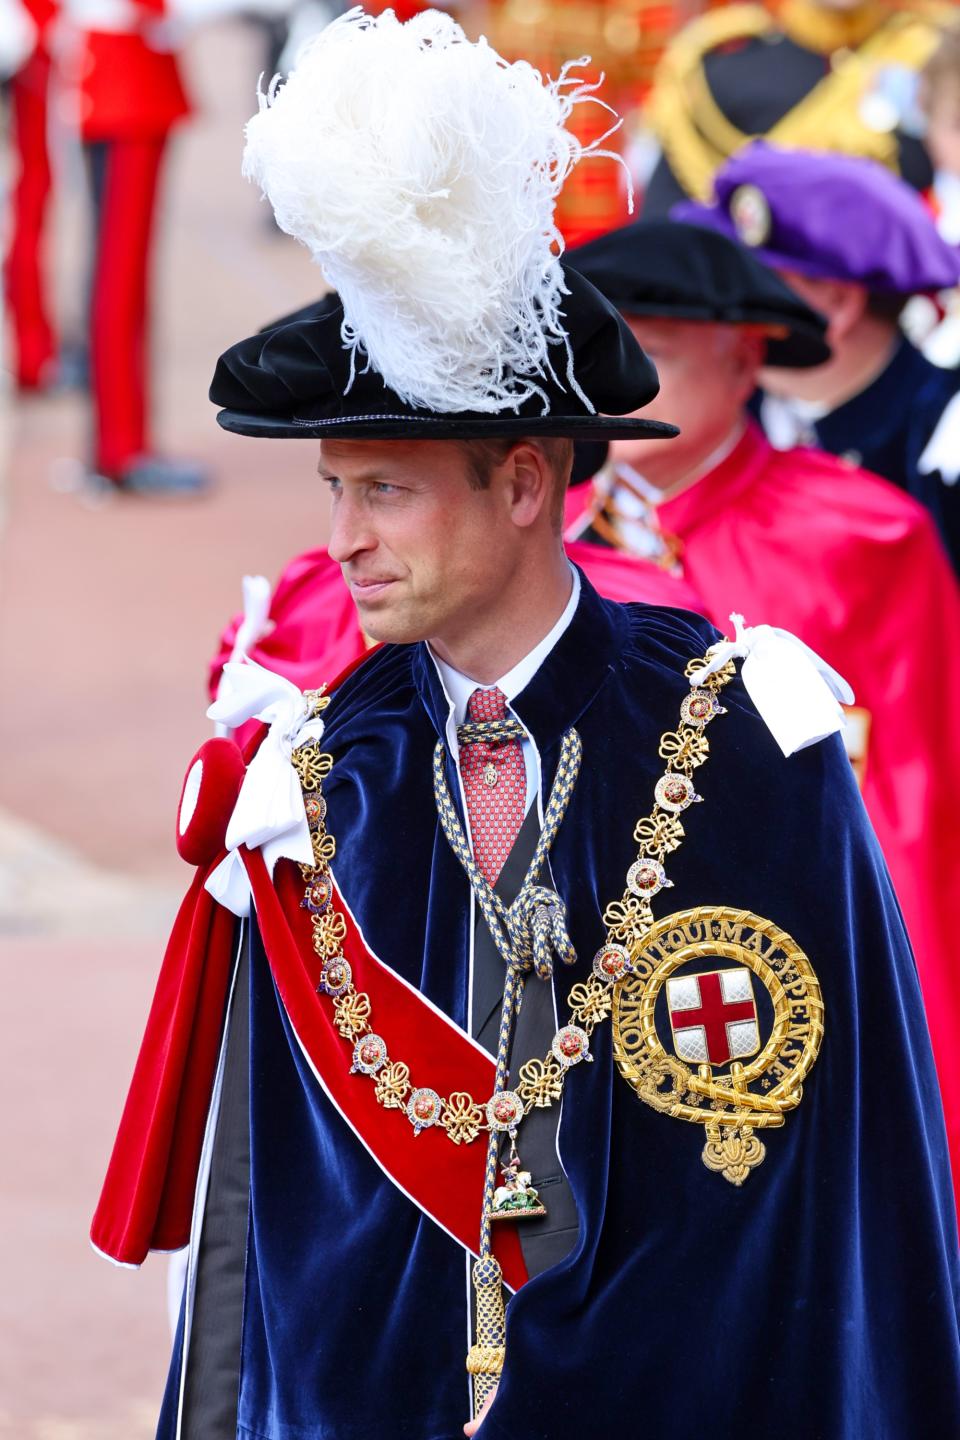 WINDSOR, ENGLAND - JUNE 17: Prince William, Prince of Wales attends the Order Of The Garter Service at Windsor Castle on June 17, 2024 in Windsor, England. The Order of the Garter, Britain's oldest chivalric order established by Edward III, includes The King, Queen, Royal Family members, and up to 24 companions honoured for their public service. Companions of the Garter are chosen personally by the Sovereign to honour those who have held public office, who have contributed in a particular way to national life or who have served the Sovereign personally. (Photo by Chris Jackson - WPA Pool/Getty Images)